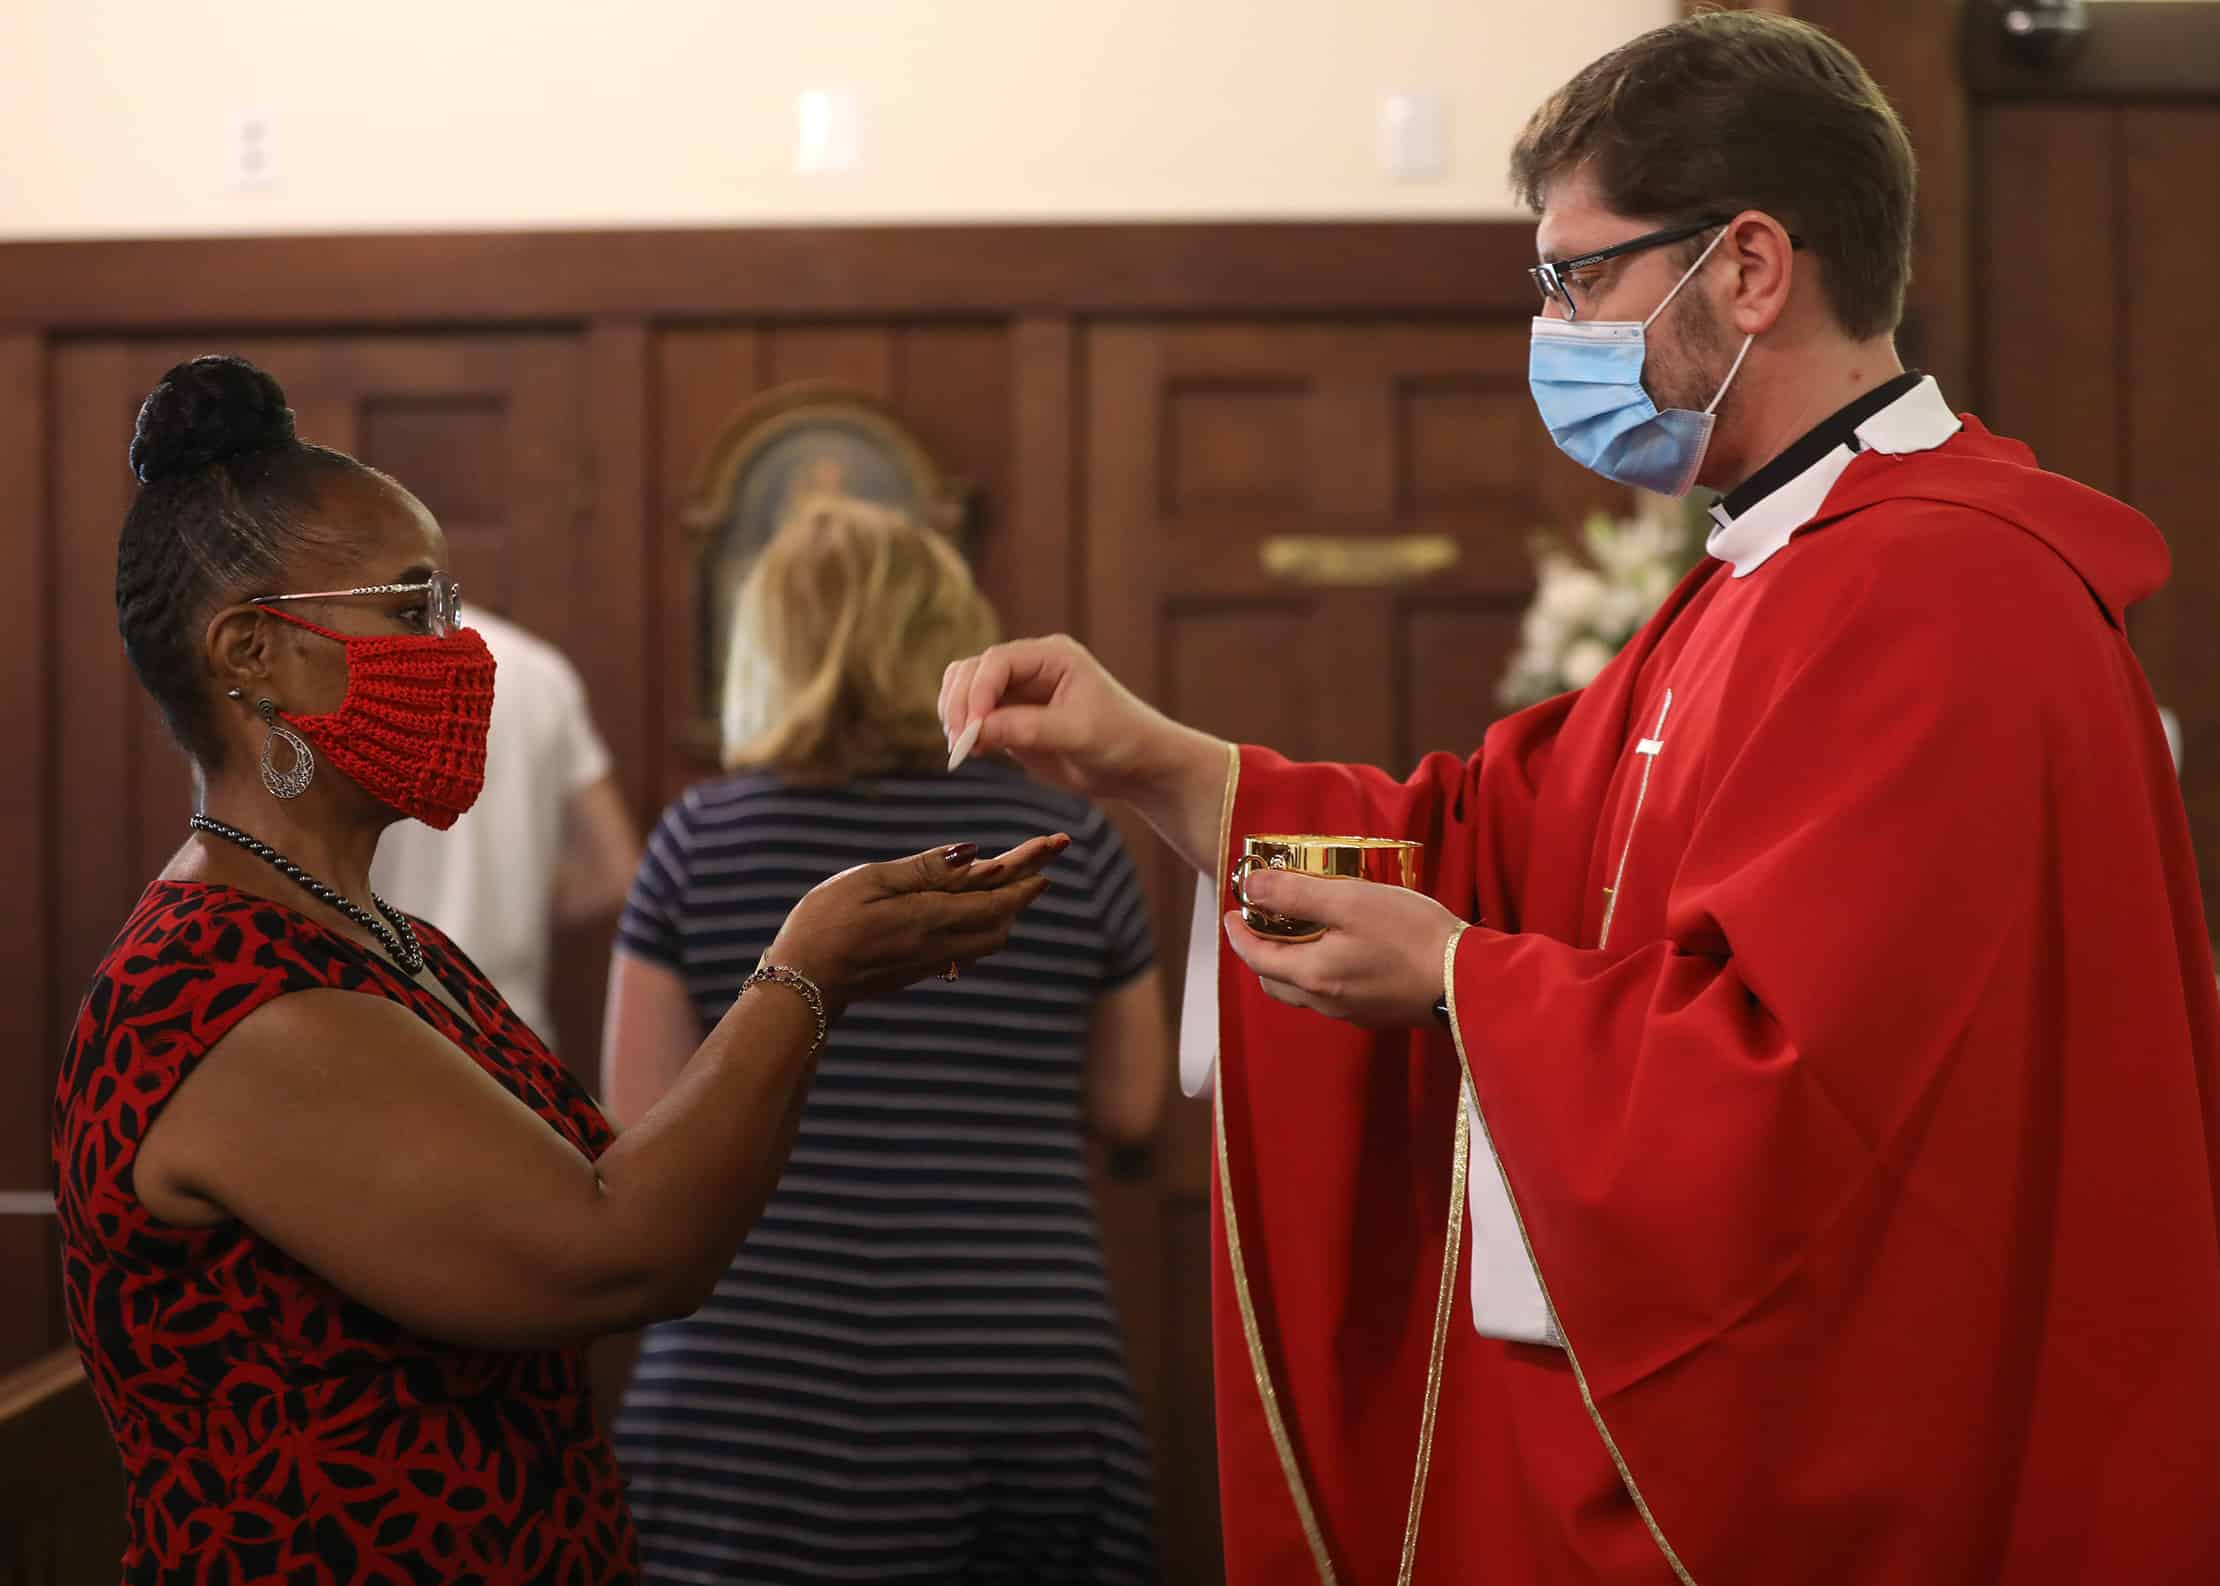 5 Rules for Discerning Whether to Go to Mass in a Pandemic